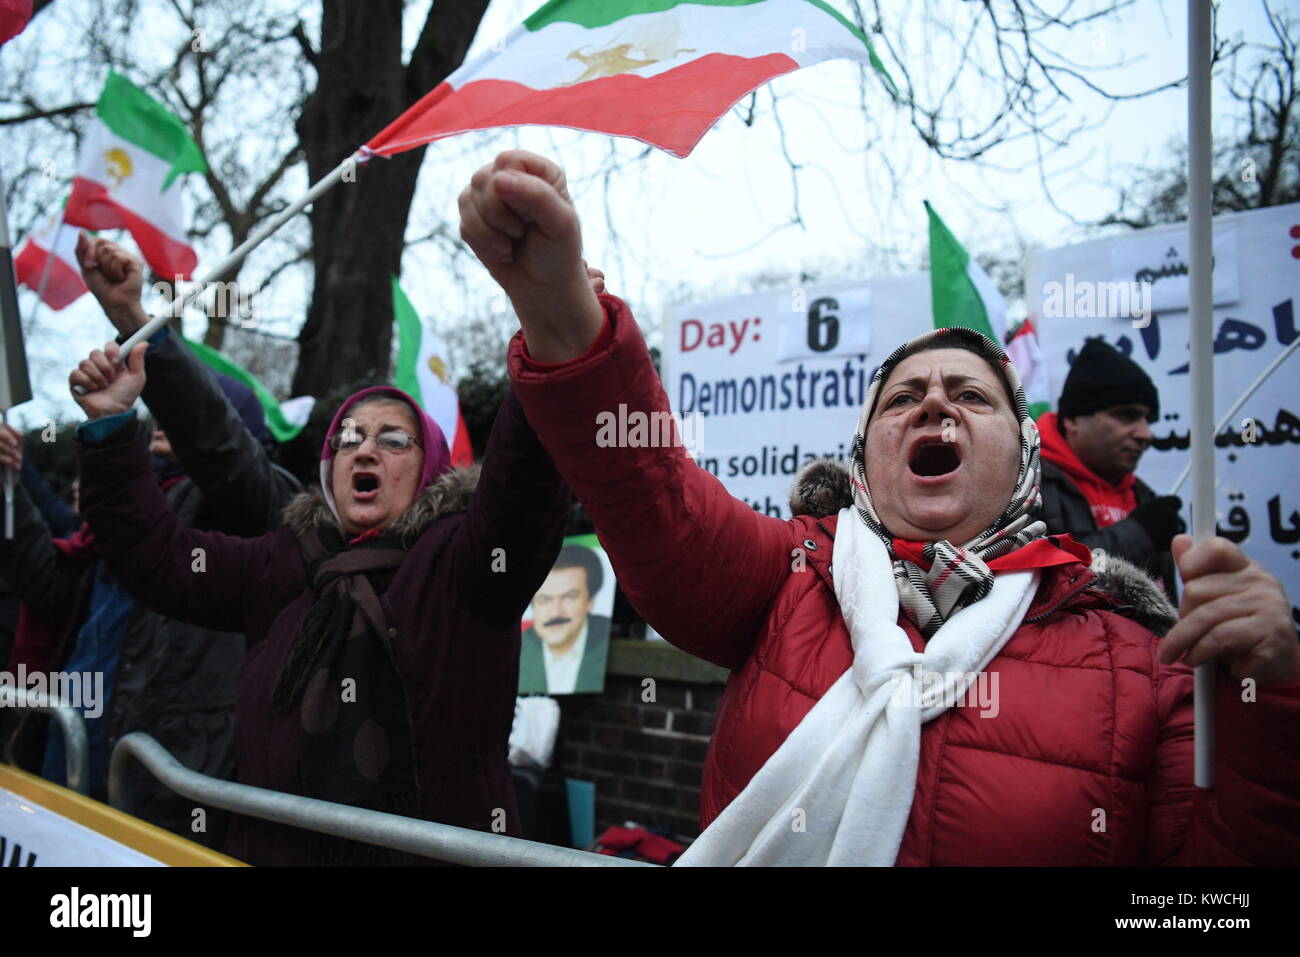 Supporters of the People's Mojahedin Organisation, Iran's main opposition, rallying outside the Iranian regime's embassy, London, in solidarity with Iranian people's protests nationwide. Stock Photo